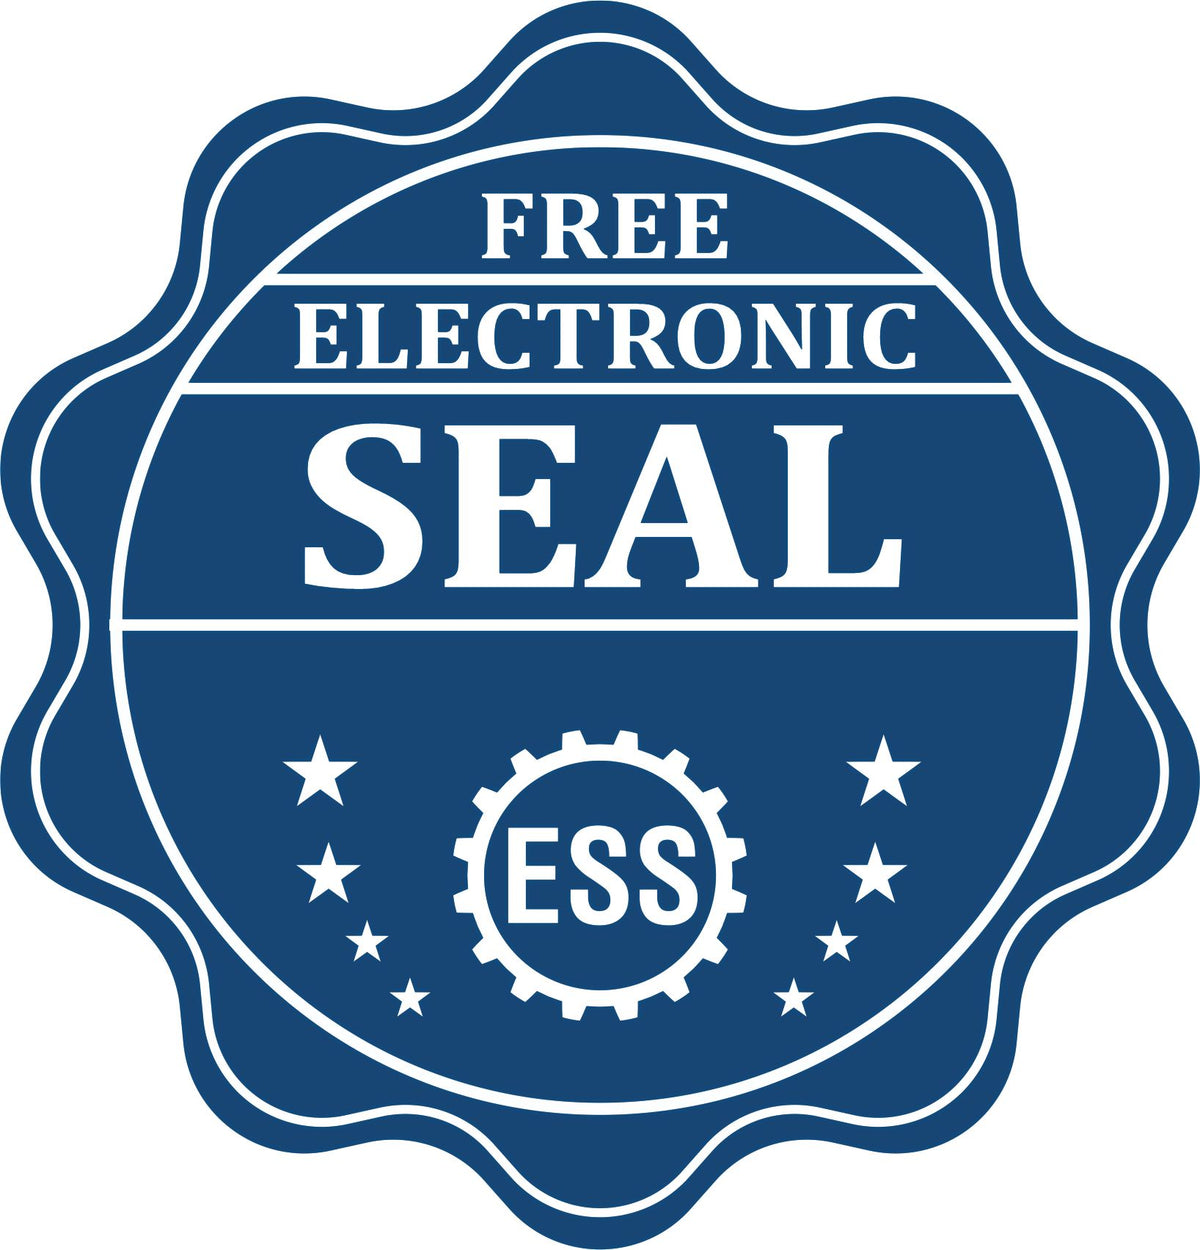 A badge showing a free electronic seal for the Gift Guam Landscape Architect Seal with stars and the ESS gear on the emblem.